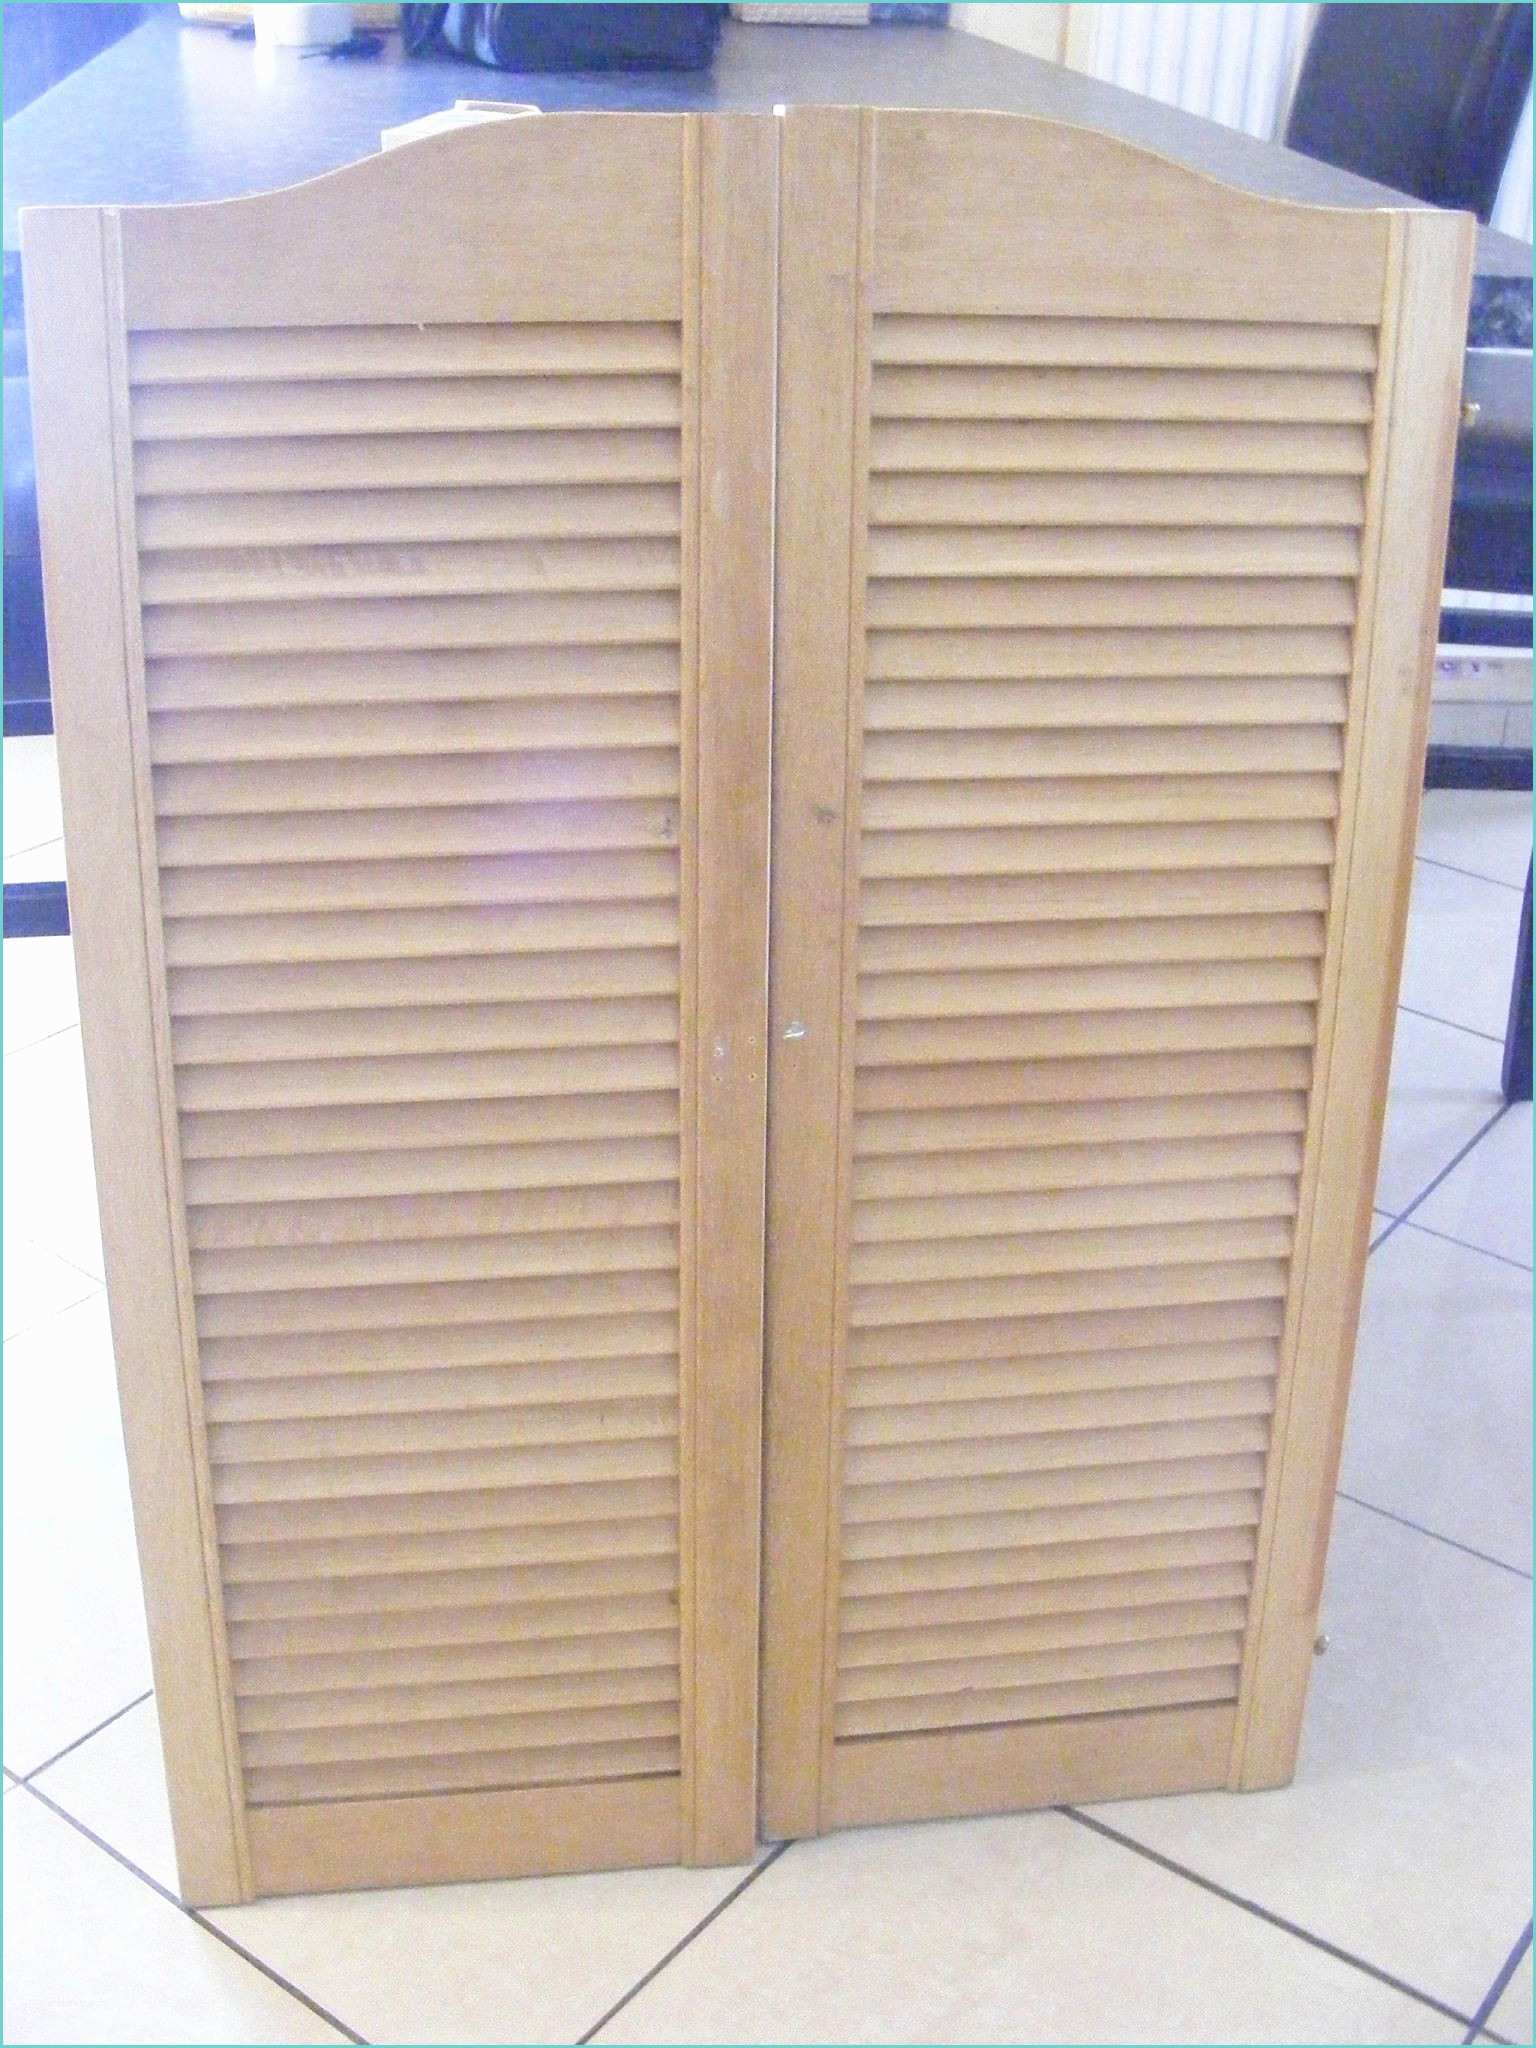 Cache Compteur Electrique Ikea Armoire Pharmacie Rossignol Perfect Armoire A Pharmacie